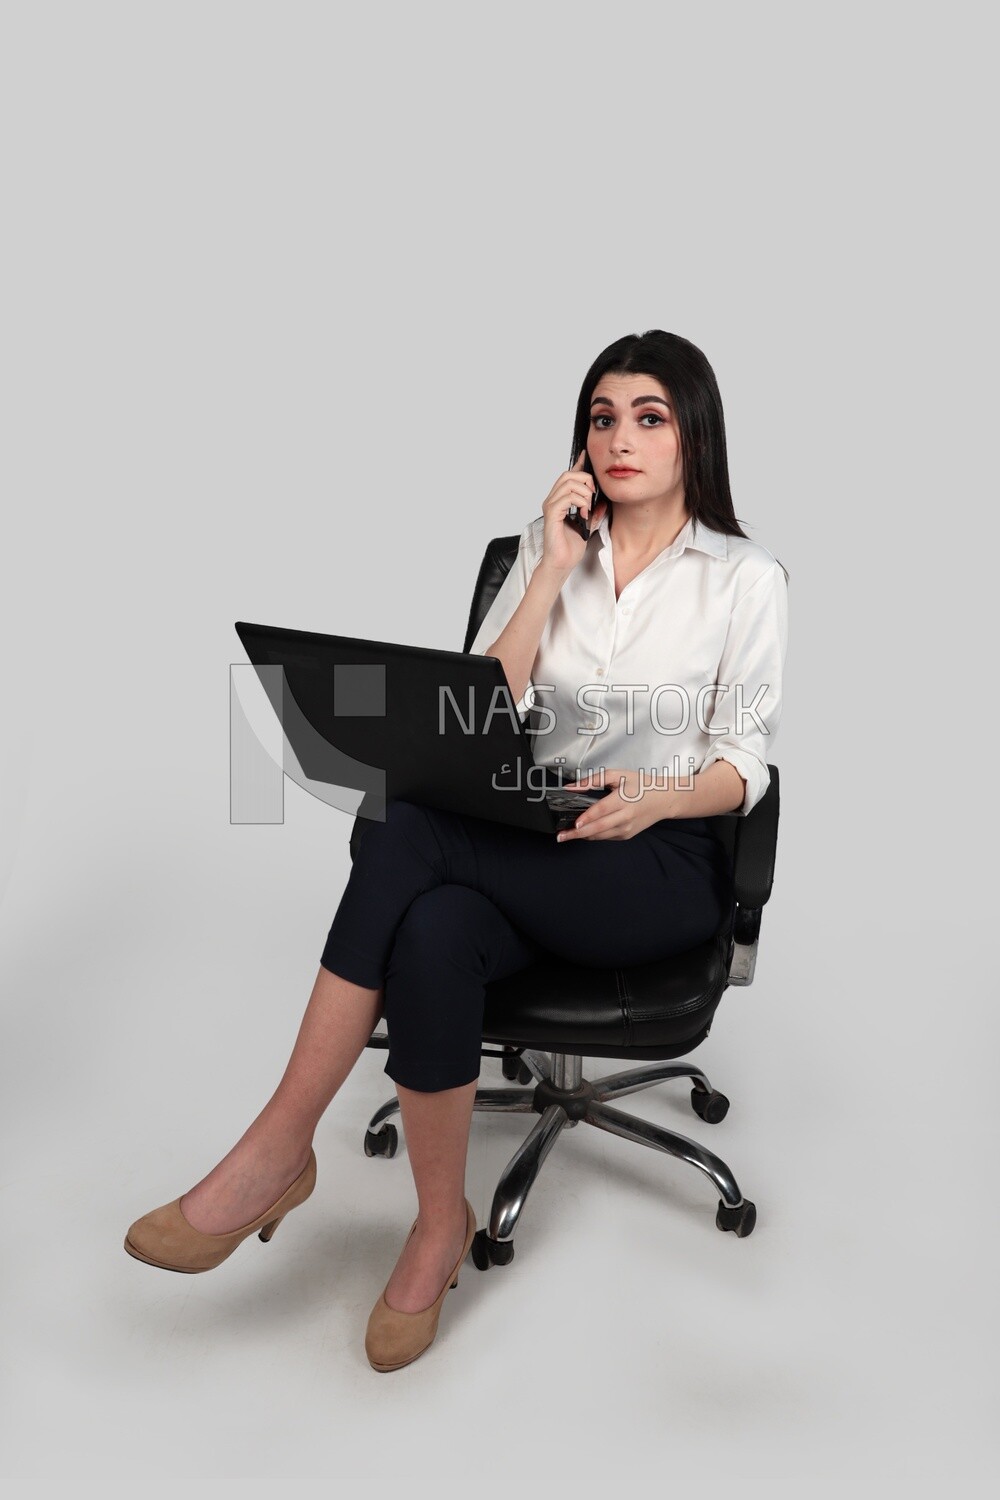 Photo of a businesswoman with formal wear sitting on a chair working on a laptop while talking on the phone, business development and partnerships, business meeting, Model